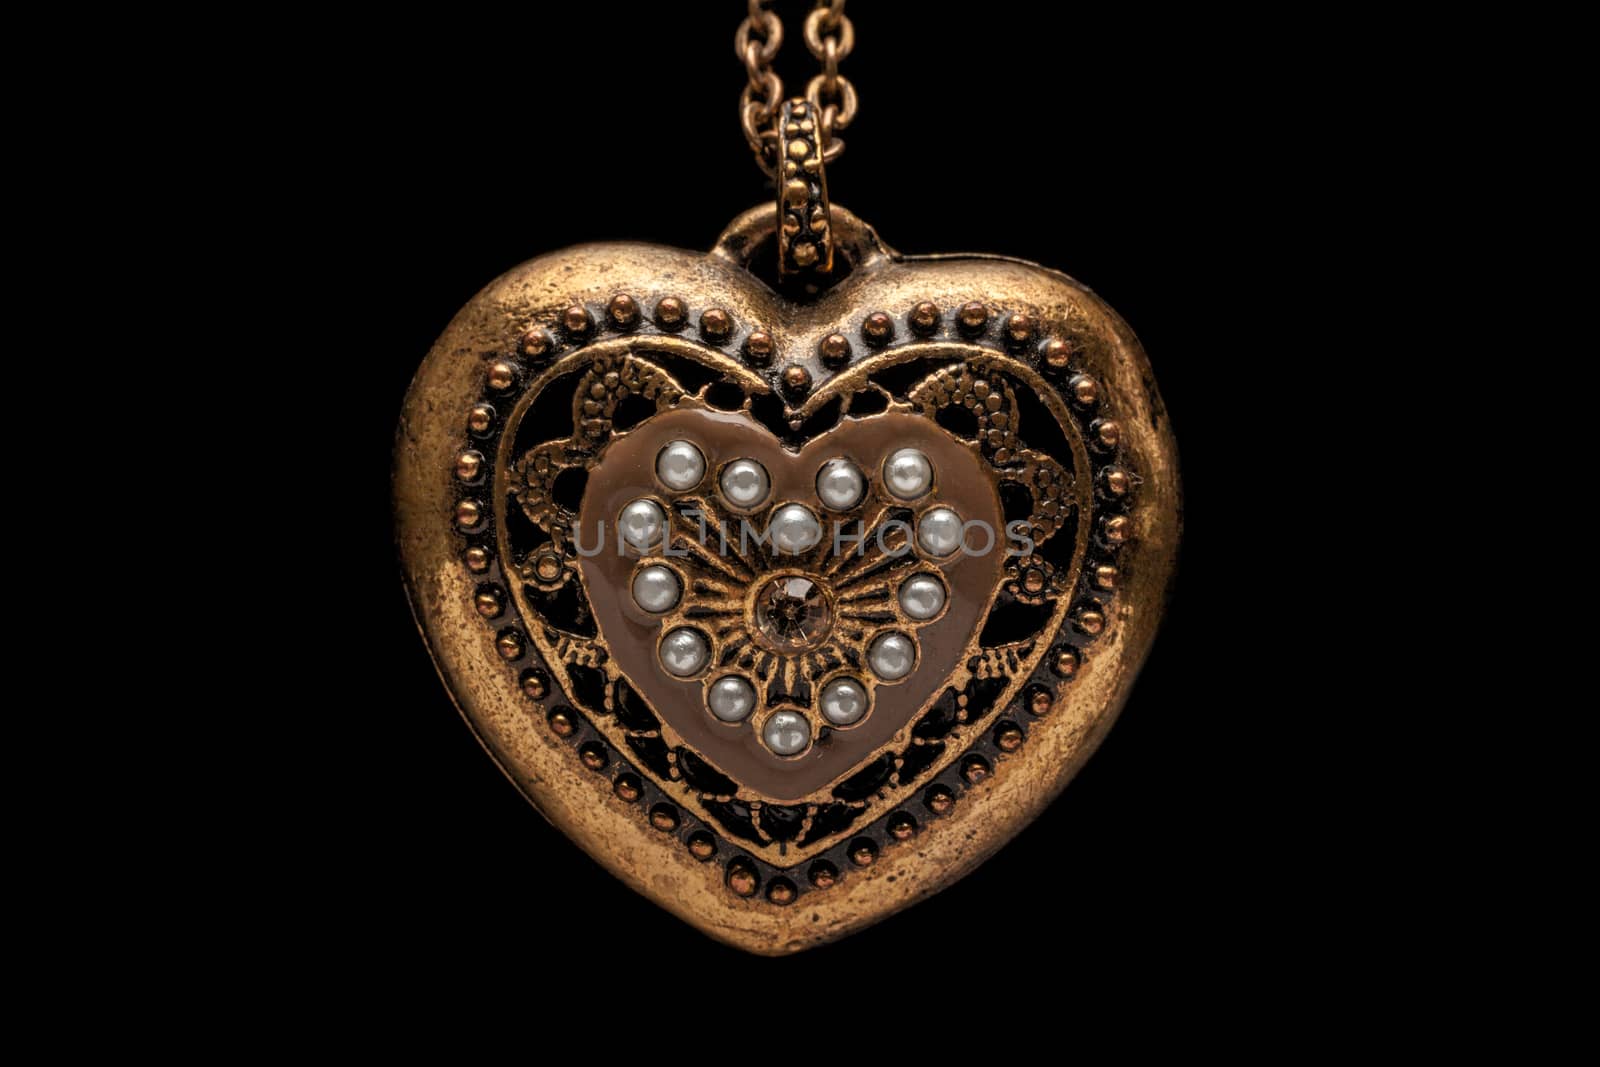 Heart-shaped necklace on black background